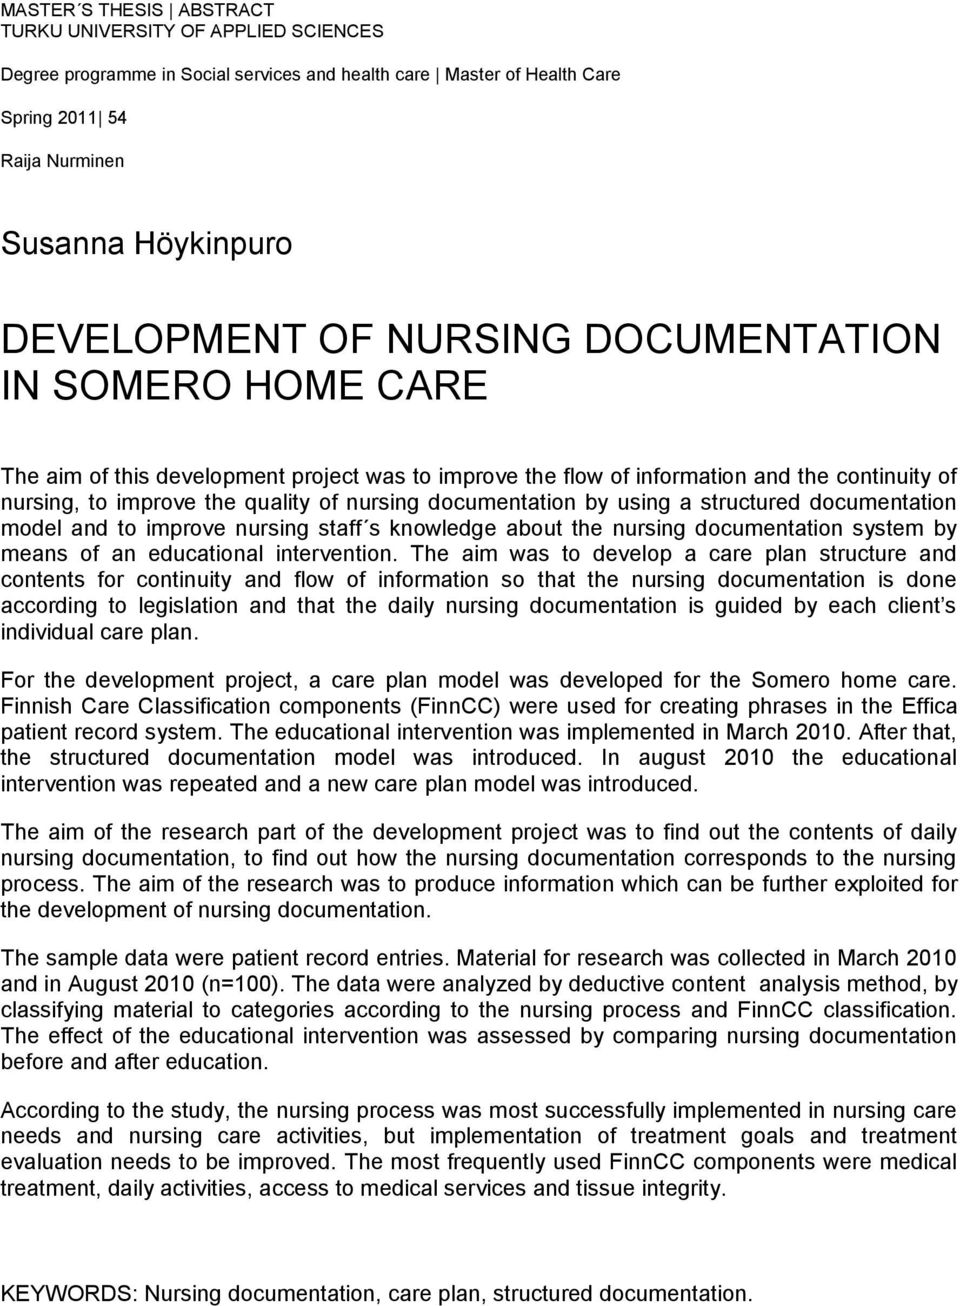 using a structured documentation model and to improve nursing staff s knowledge about the nursing documentation system by means of an educational intervention.